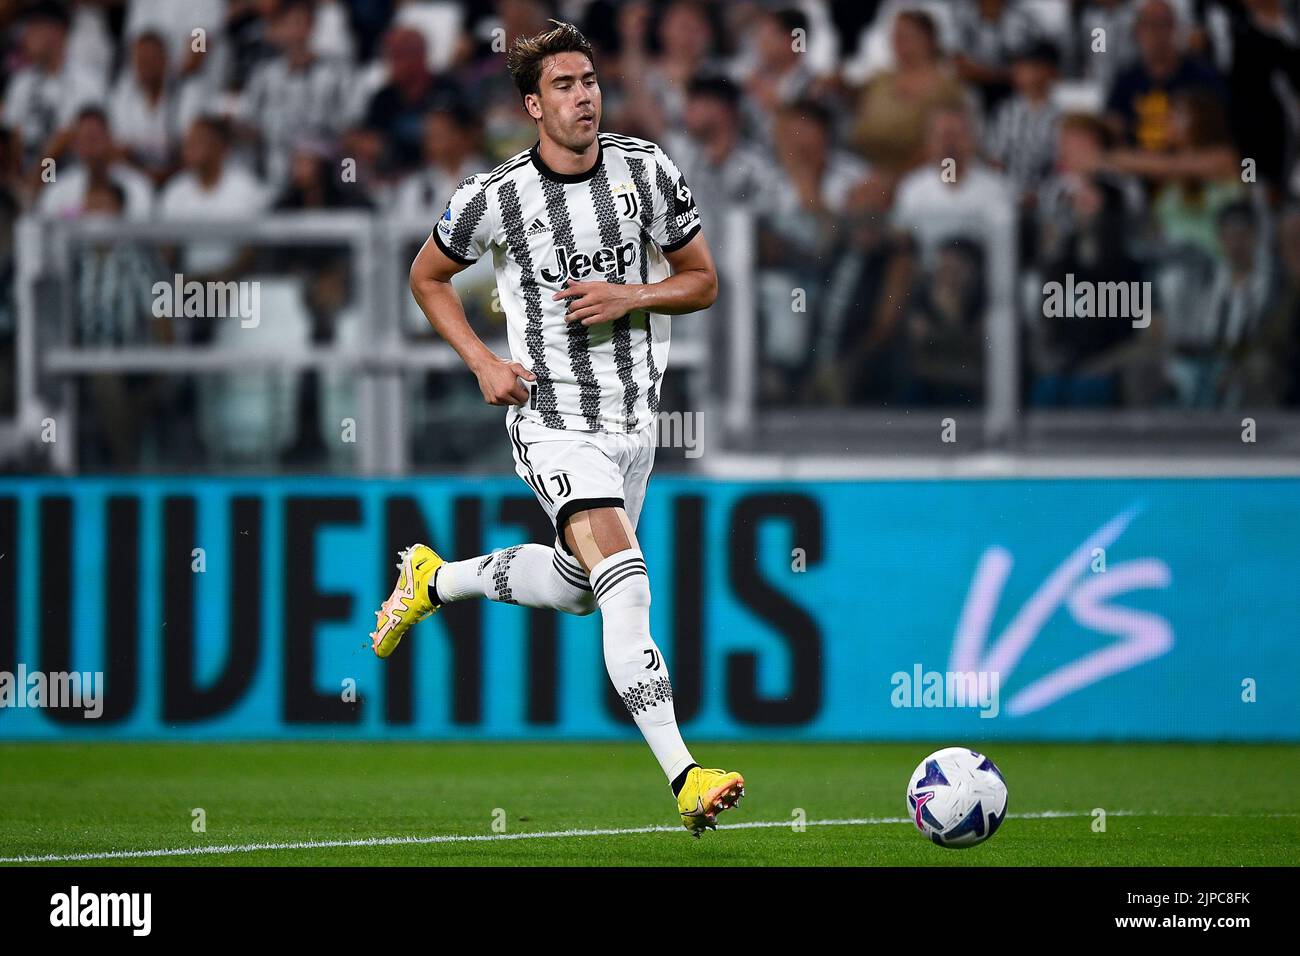 Turin, Italy. 15 August 2022. Dusan Vlahovic of Juventus FC in action during the Serie A football match between Juventus FC and US Sassuolo. Credit: Nicolò Campo/Alamy Live News Stock Photo